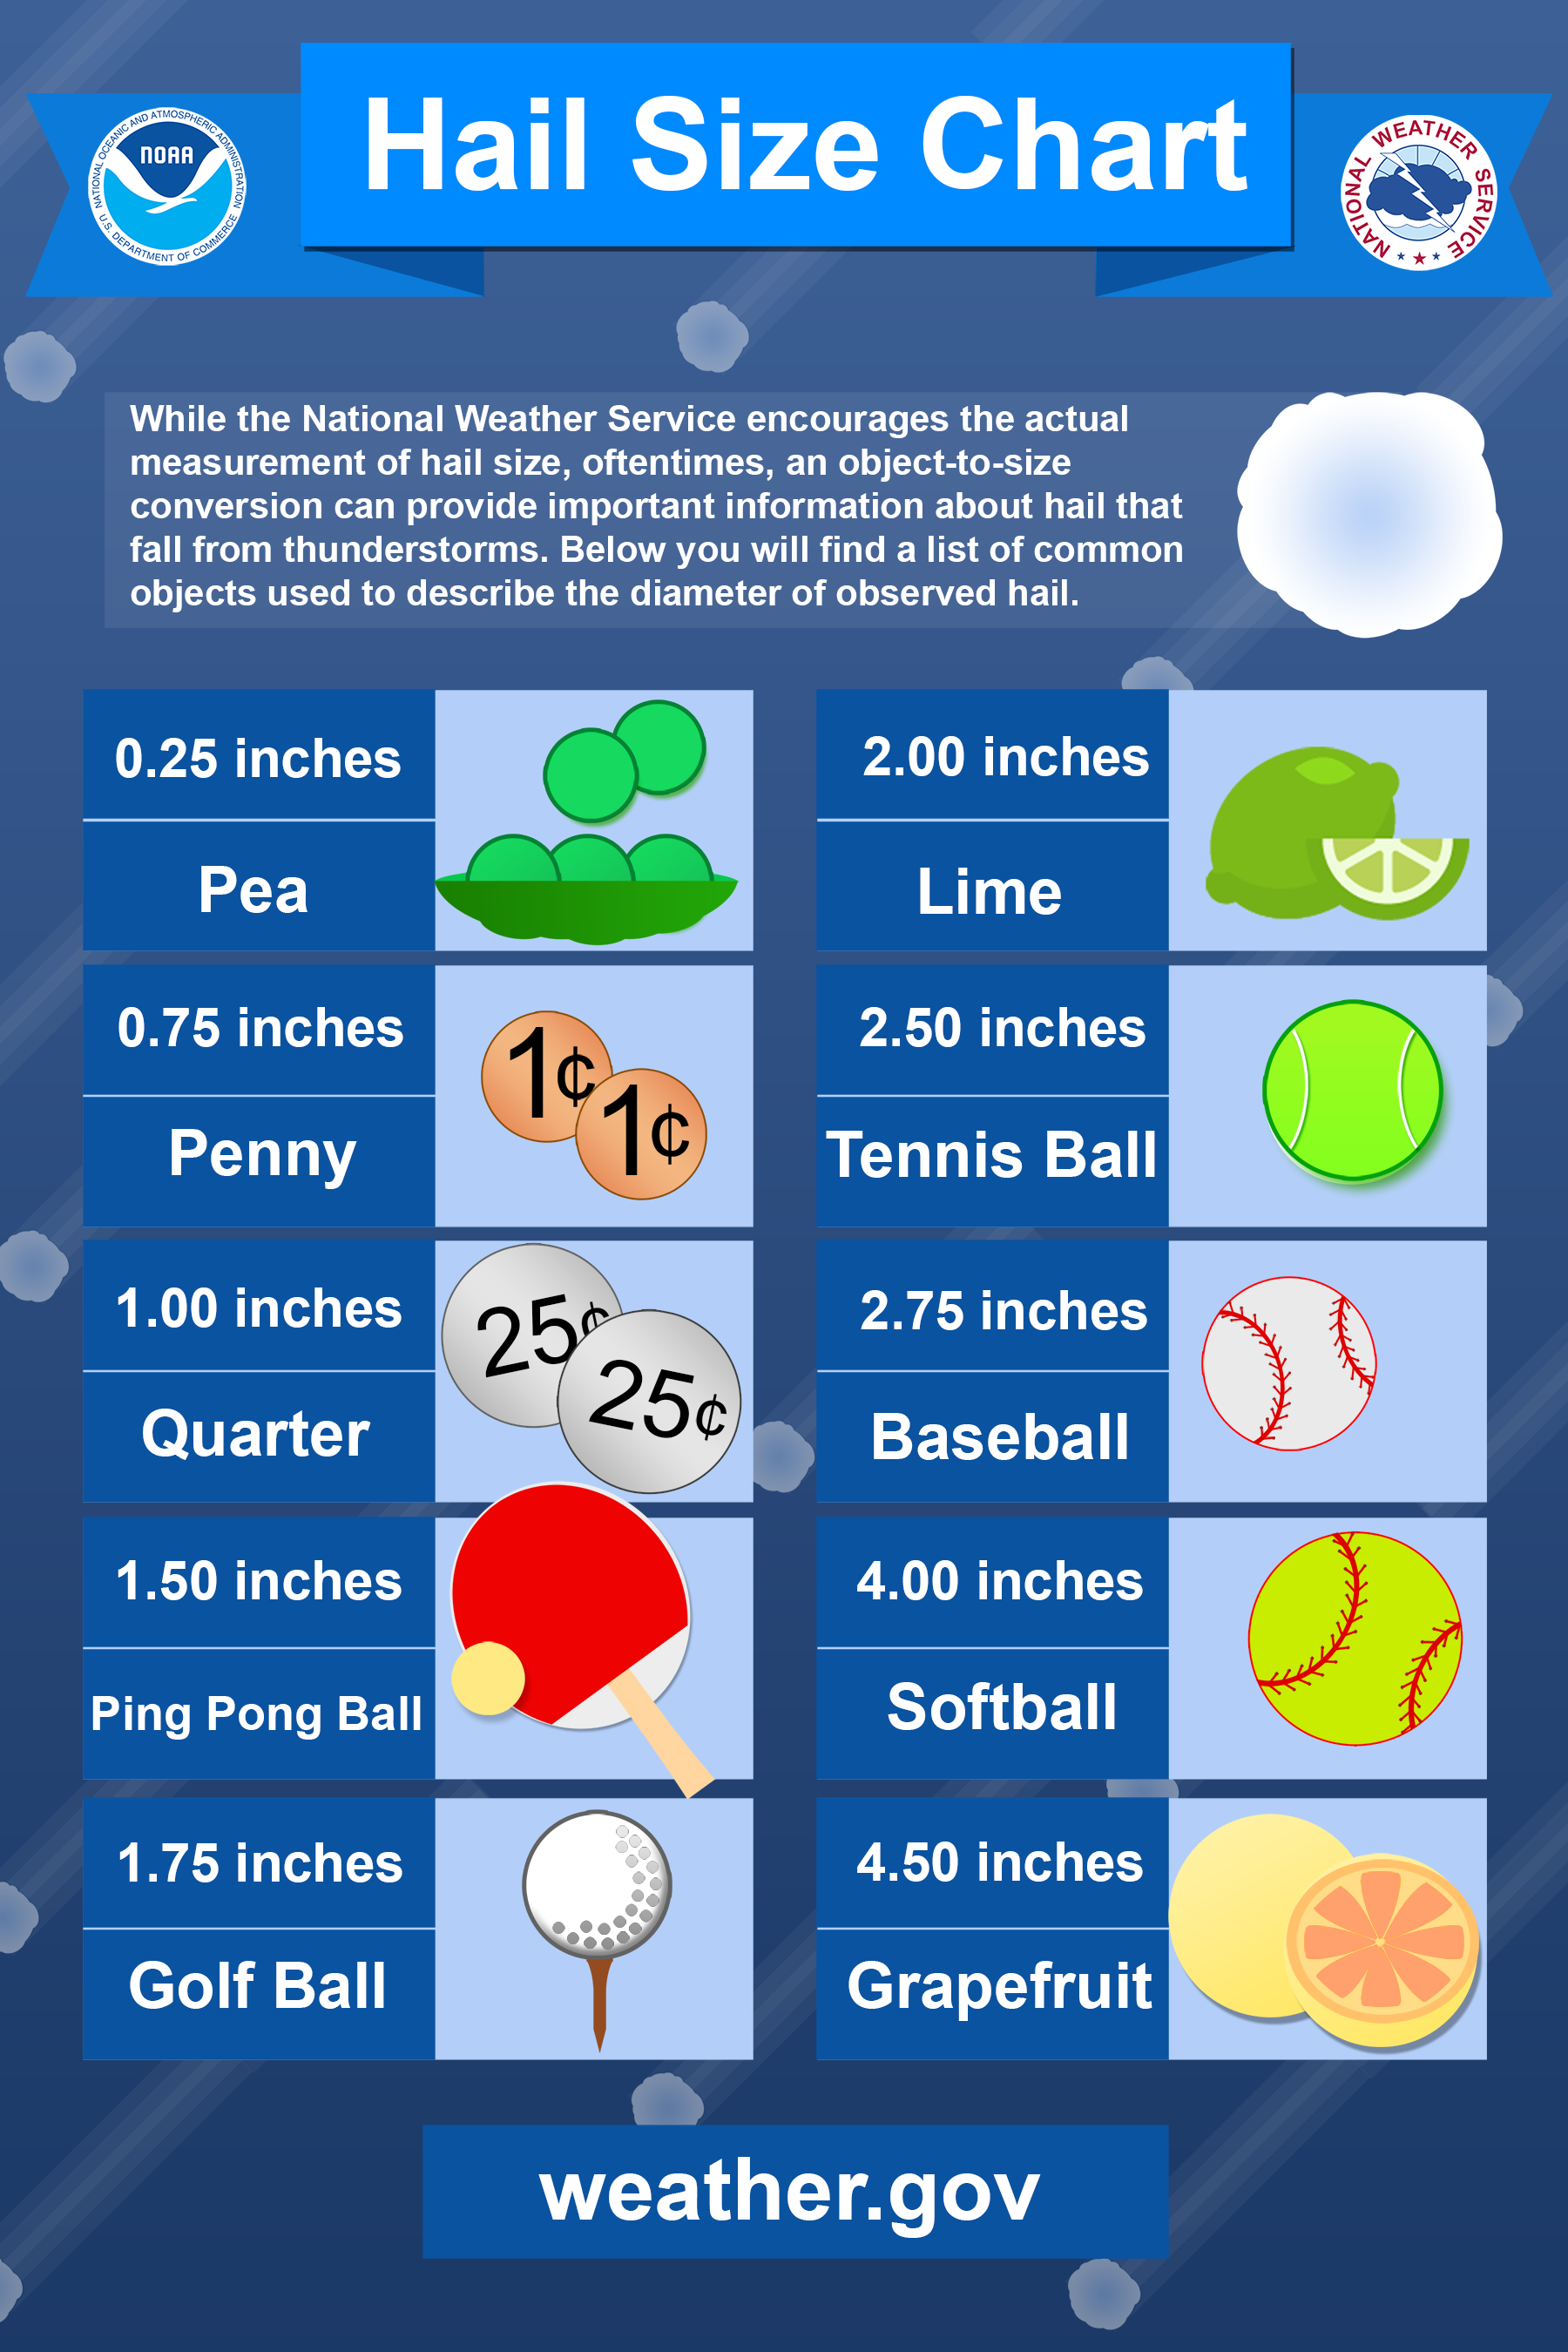 Hail Size Chart - while the National Weather Service encourages the actual measurements of hail size, oftentimes, an object-to-size conversion can provide important information about hail that fall from thunderstorms. Below you will find a list of common objects used to describe the diameter of observed hail. Pea: 0.25 inches. Penny: 0.75 inches. Quarter: 1.00 inches. Ping pong ball: 1.50 inches. Gold ball: 1.75 inches. Lime: 2.00 inches. Tennis Ball: 2.50 inches. Baseball: 2.75 inches. Softball: 4:00 inches. Grapefruit: 4.50 inches. weather.gov